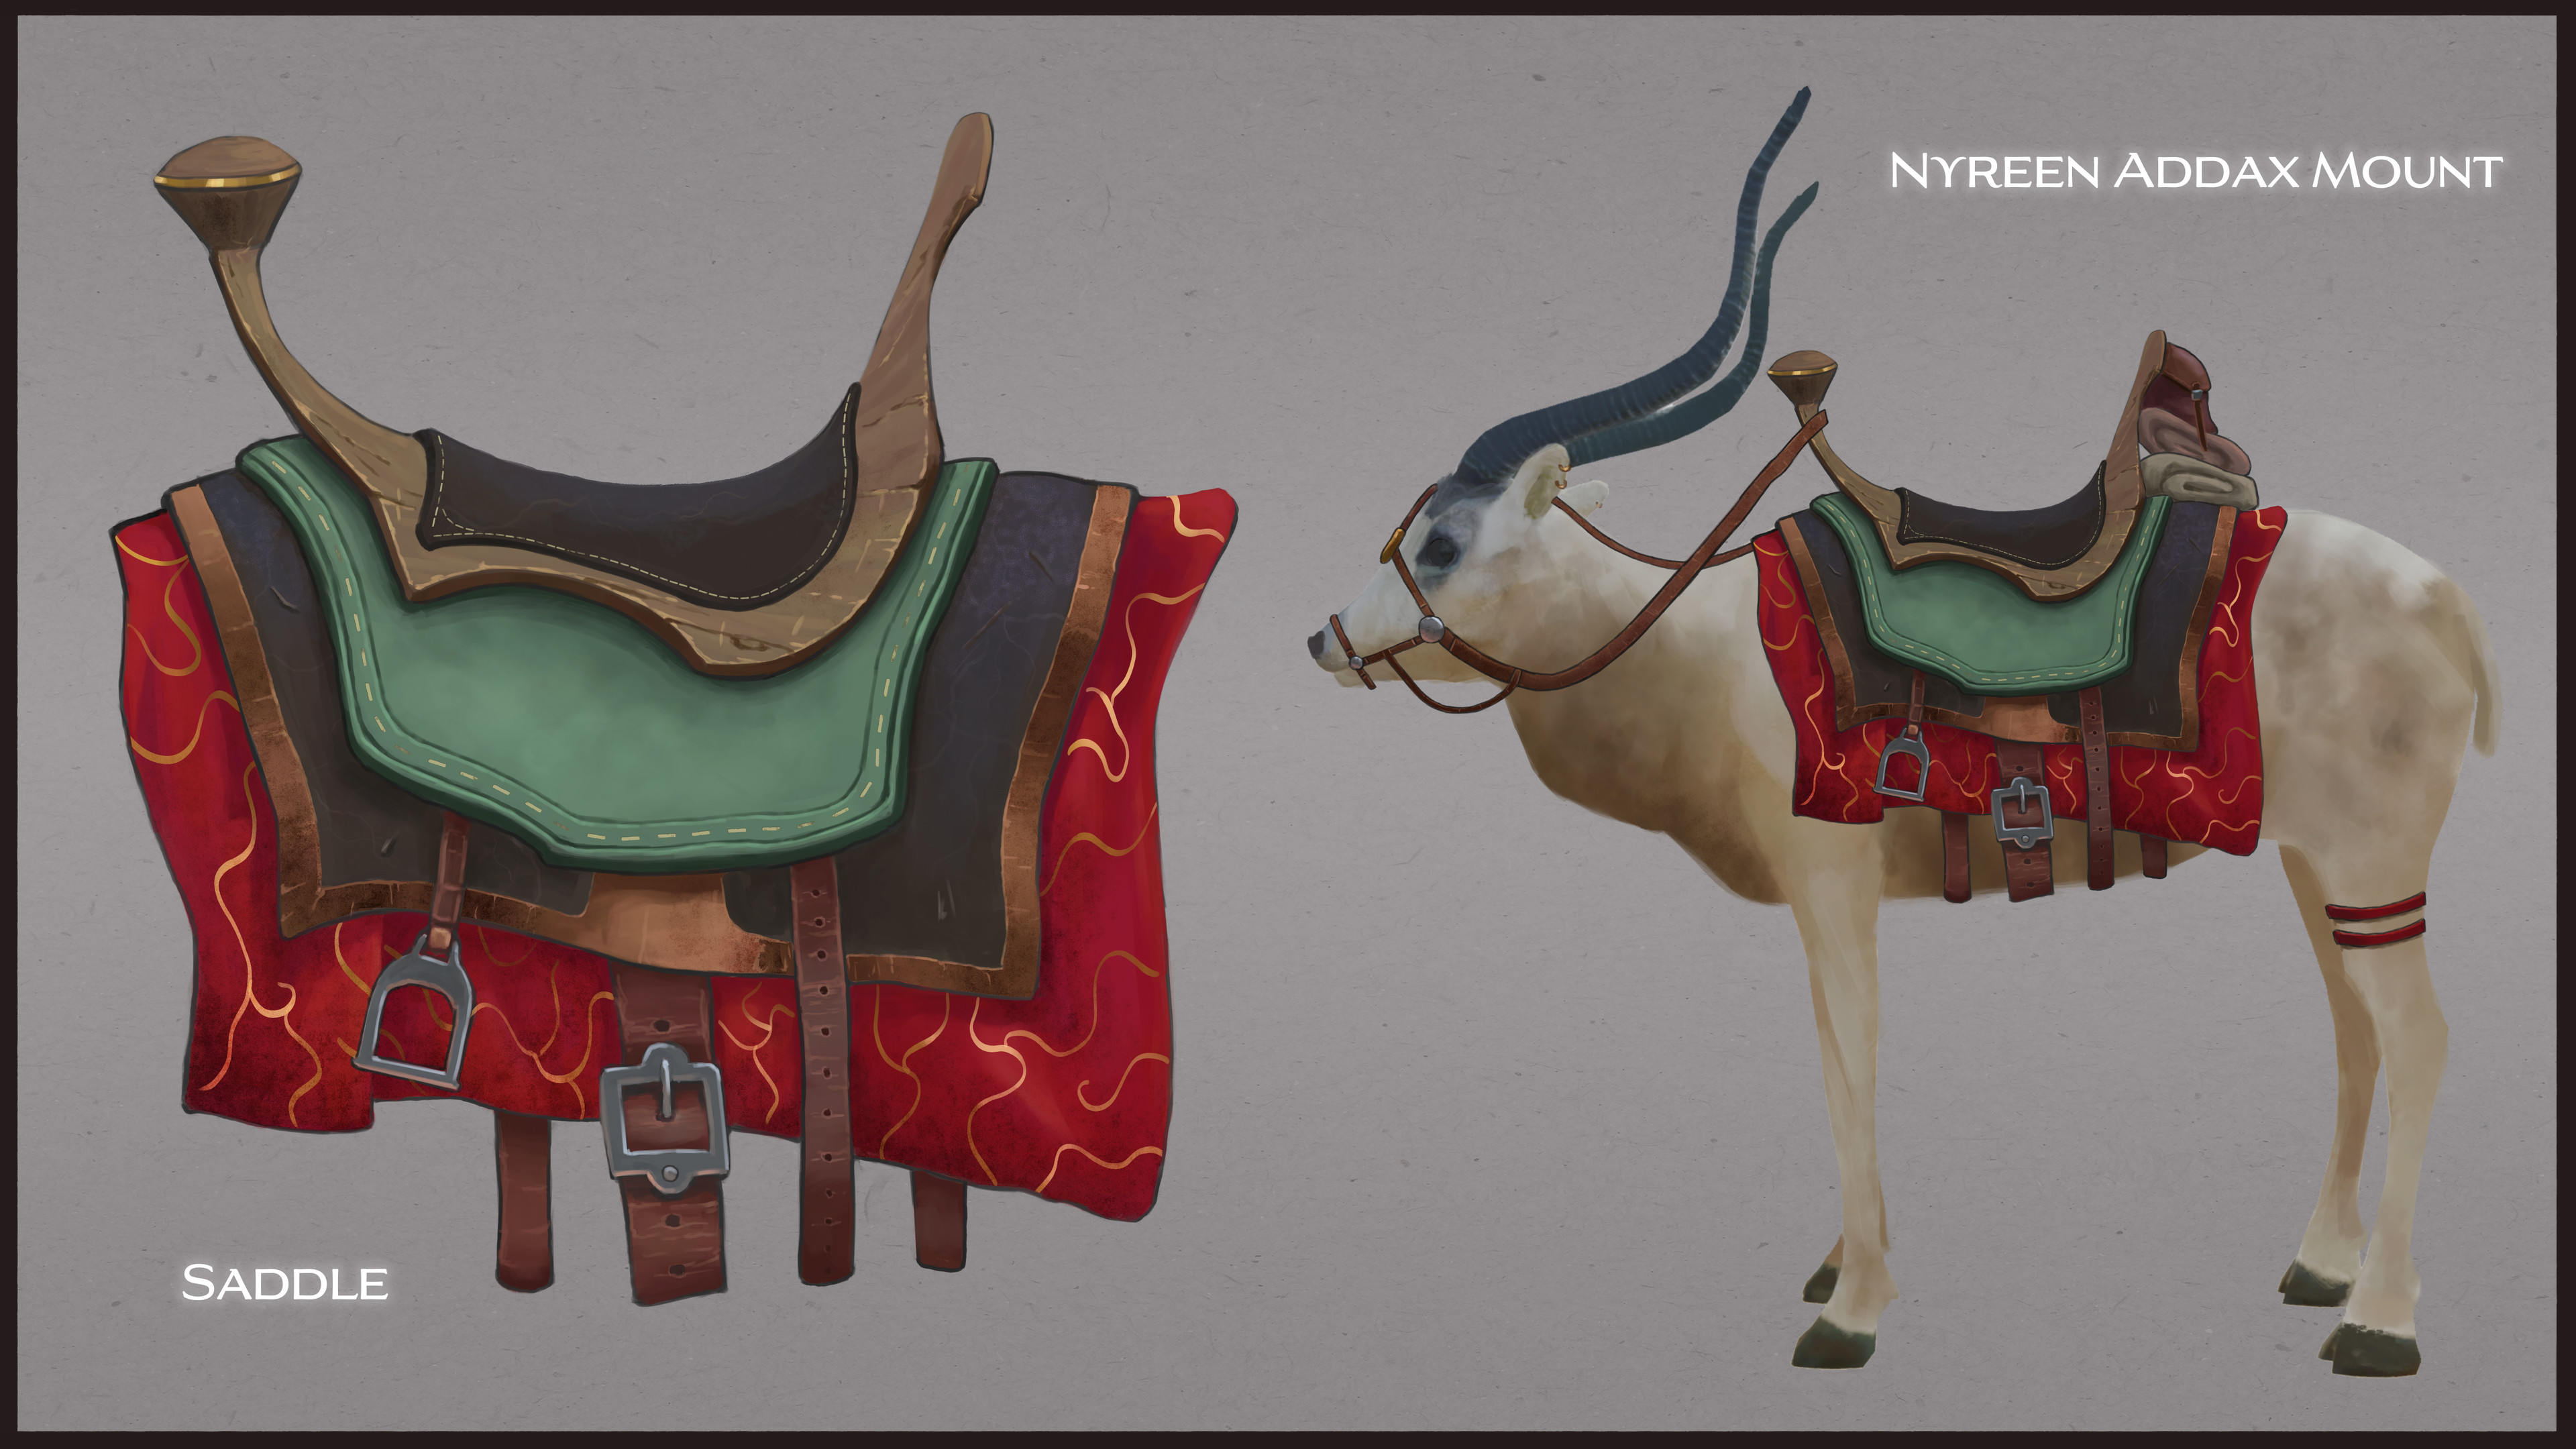 Merchants and travellers around the desert city of Nyreen use a species of Addax, a type of antelope, to cover long distances.